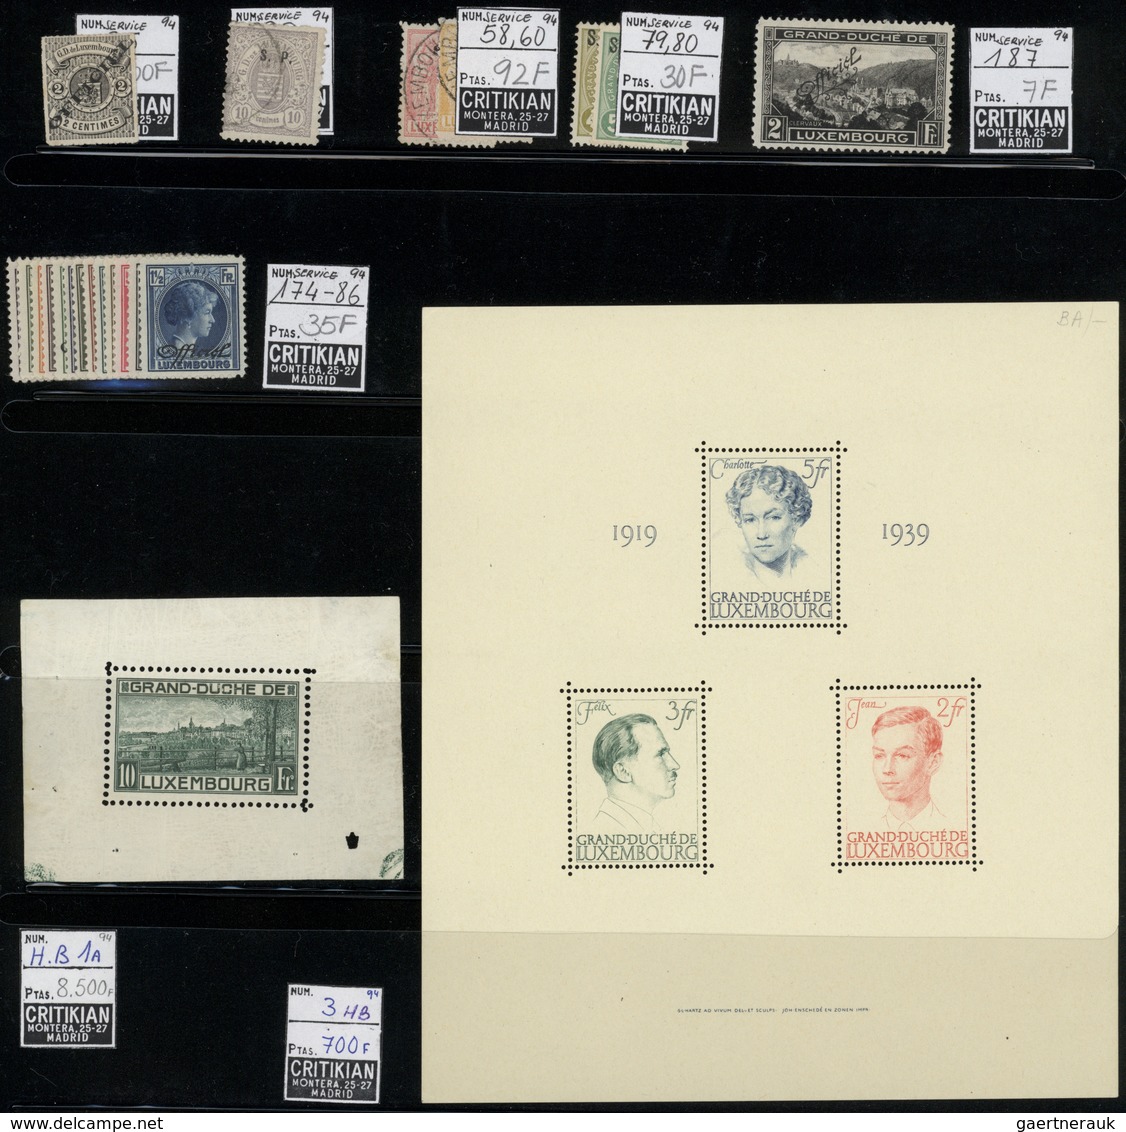 29582 Alle Welt: 1870/1990 (approx). Very interesting lot with stamp issues from all over the world. Rewar